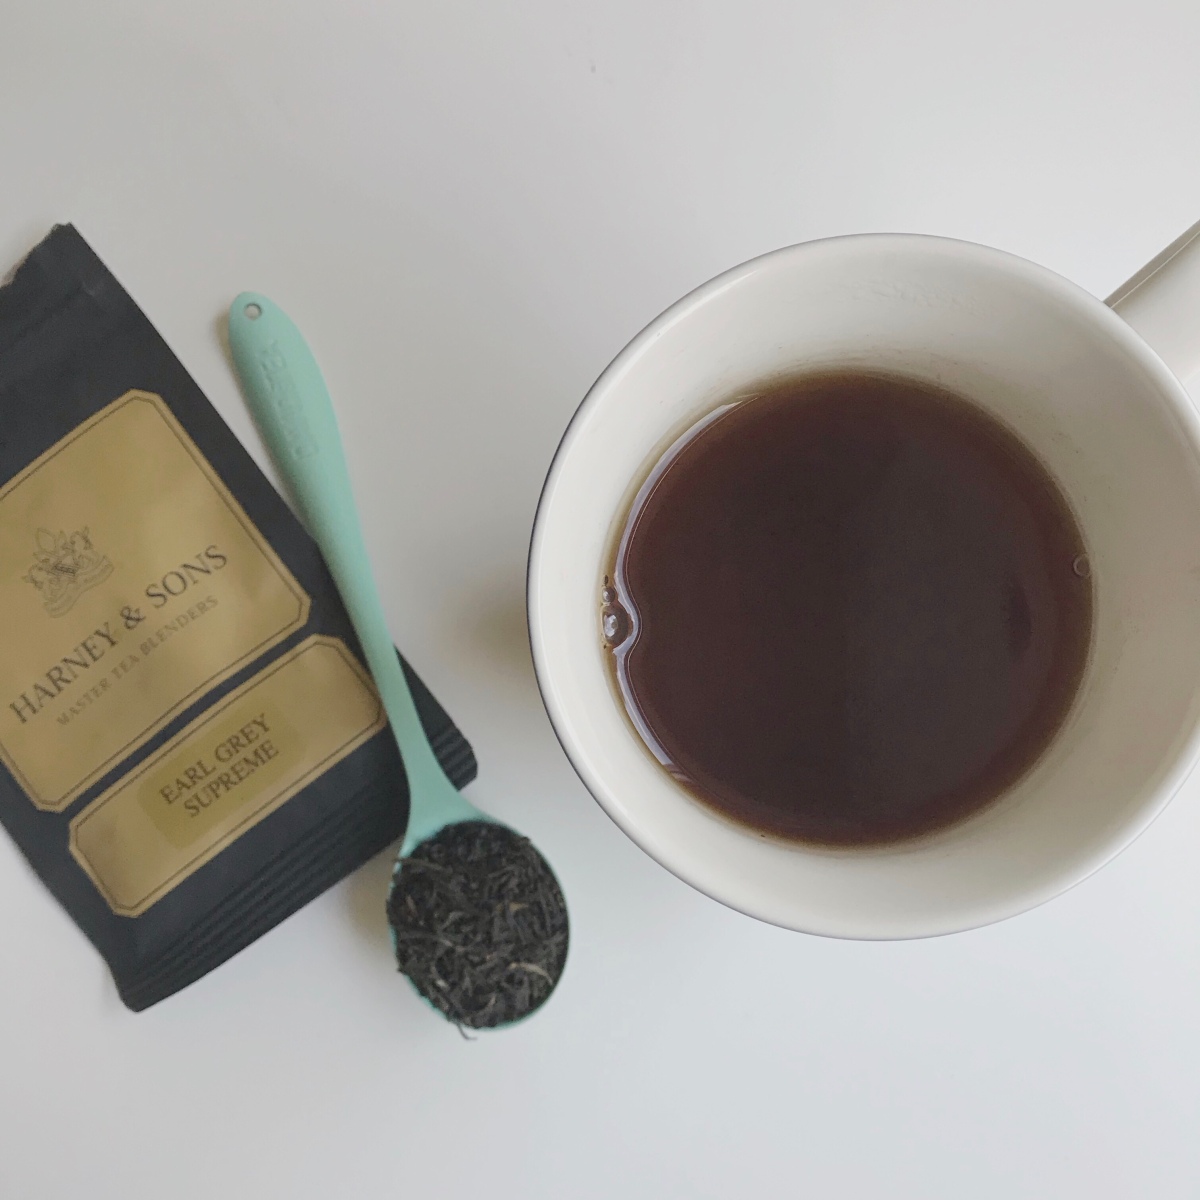 Earl Grey Supreme from Harney & Sons